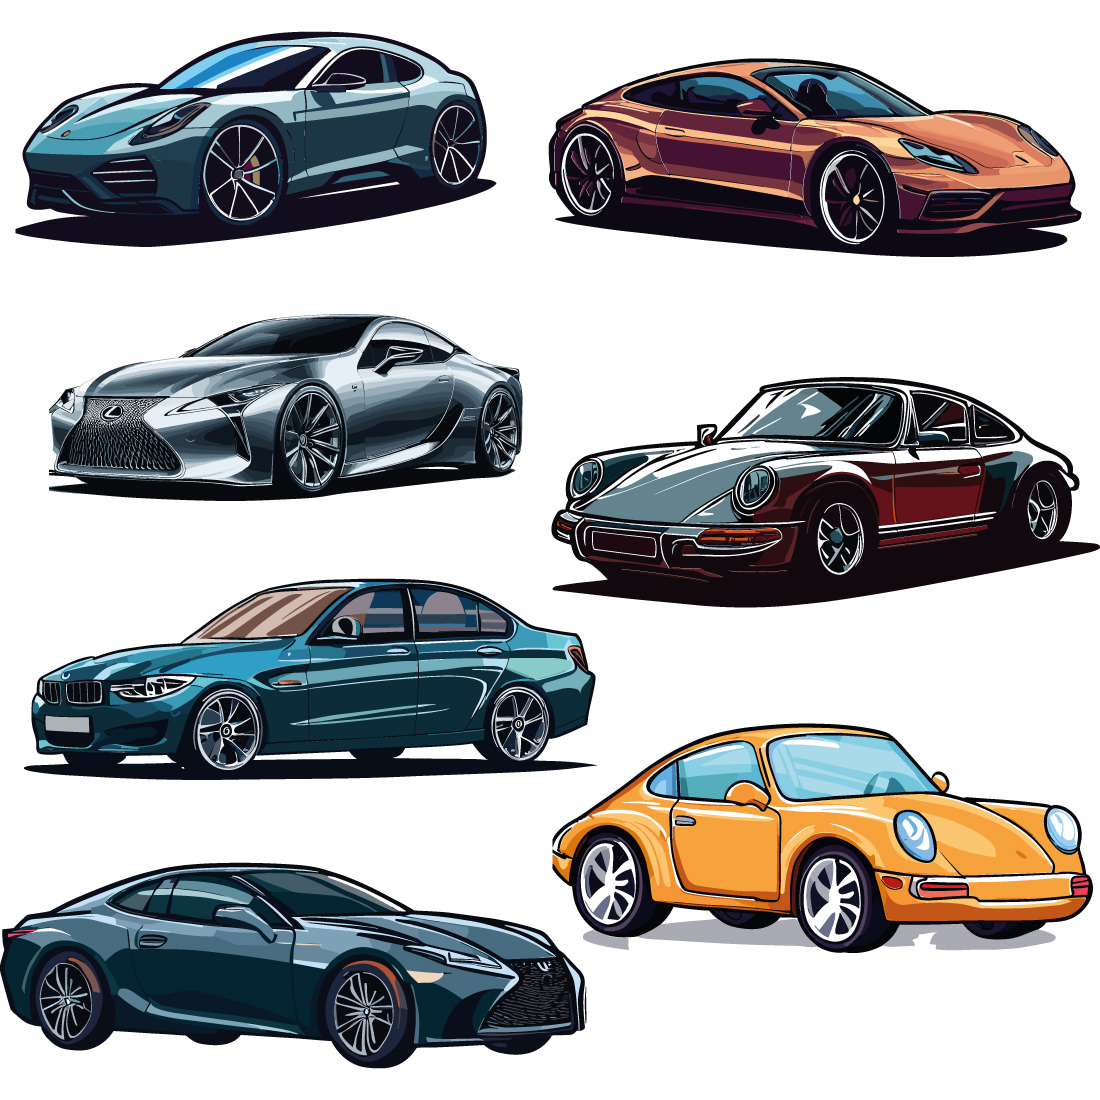 Car cartoon characters Set of characters preview image.